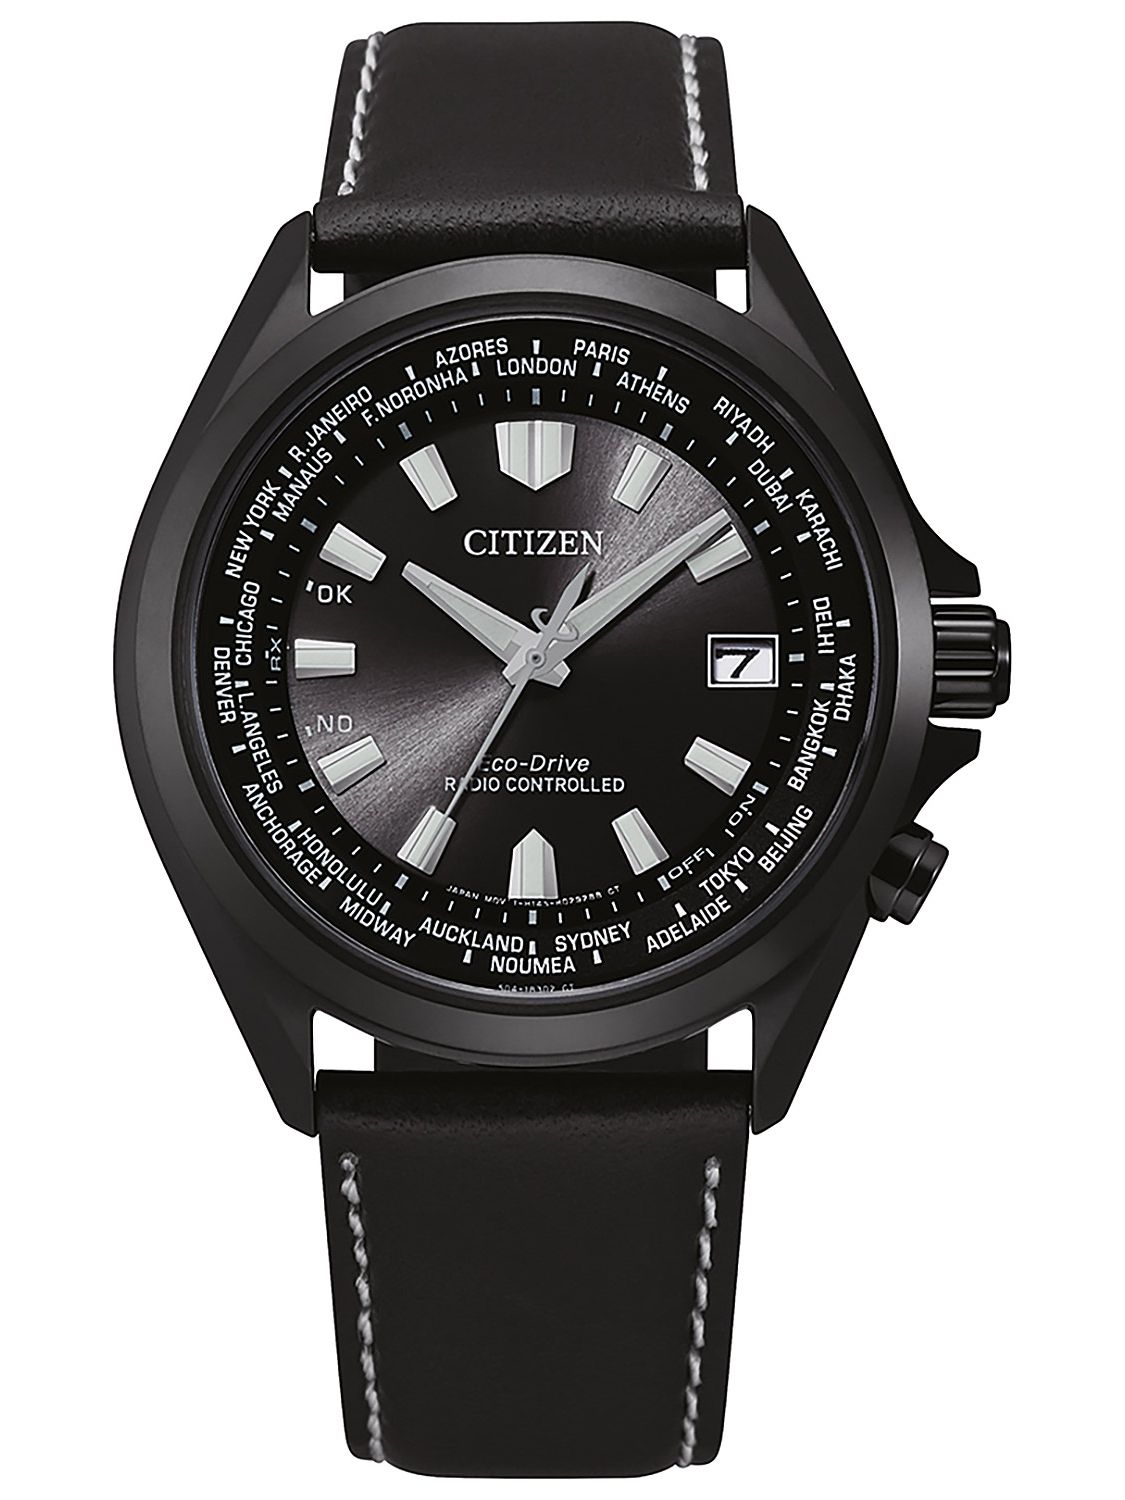 Citizen Eco Drive Radio Controlled - 15 % saved!*